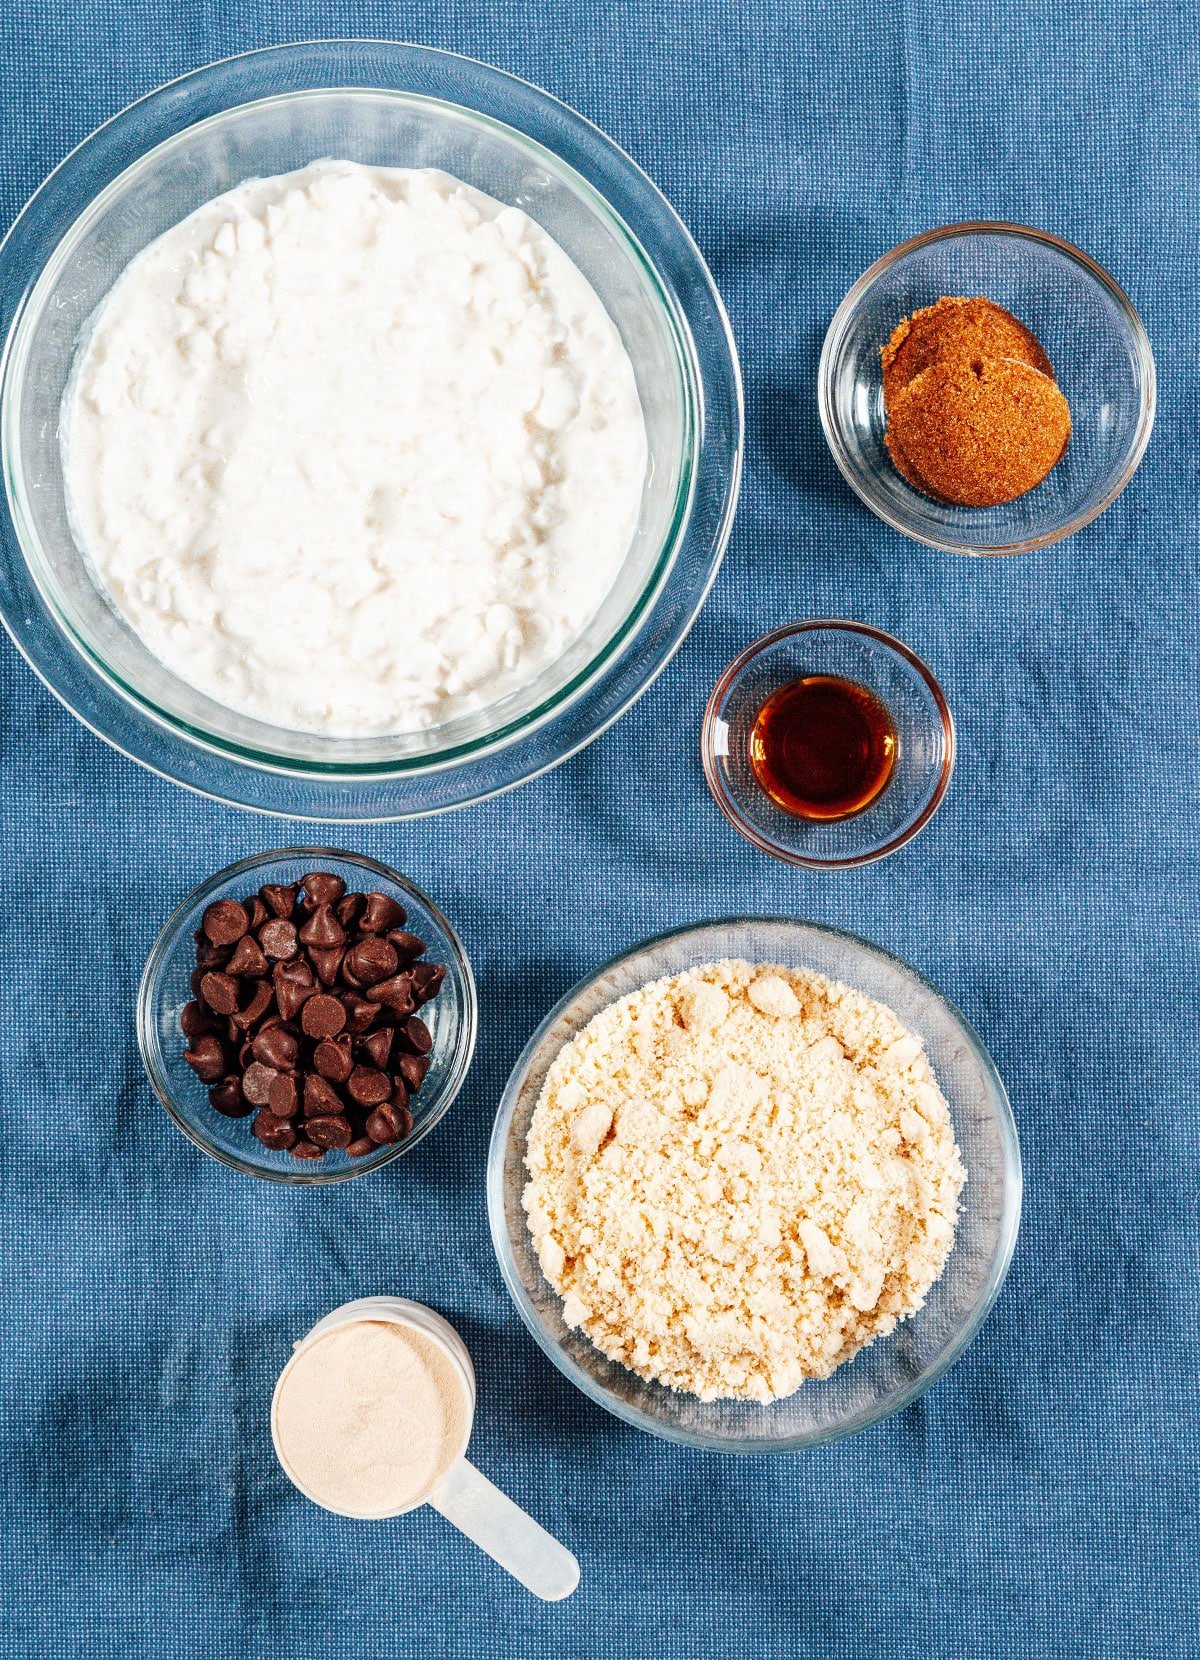 Ingredients for cottage cheese cookie dough.